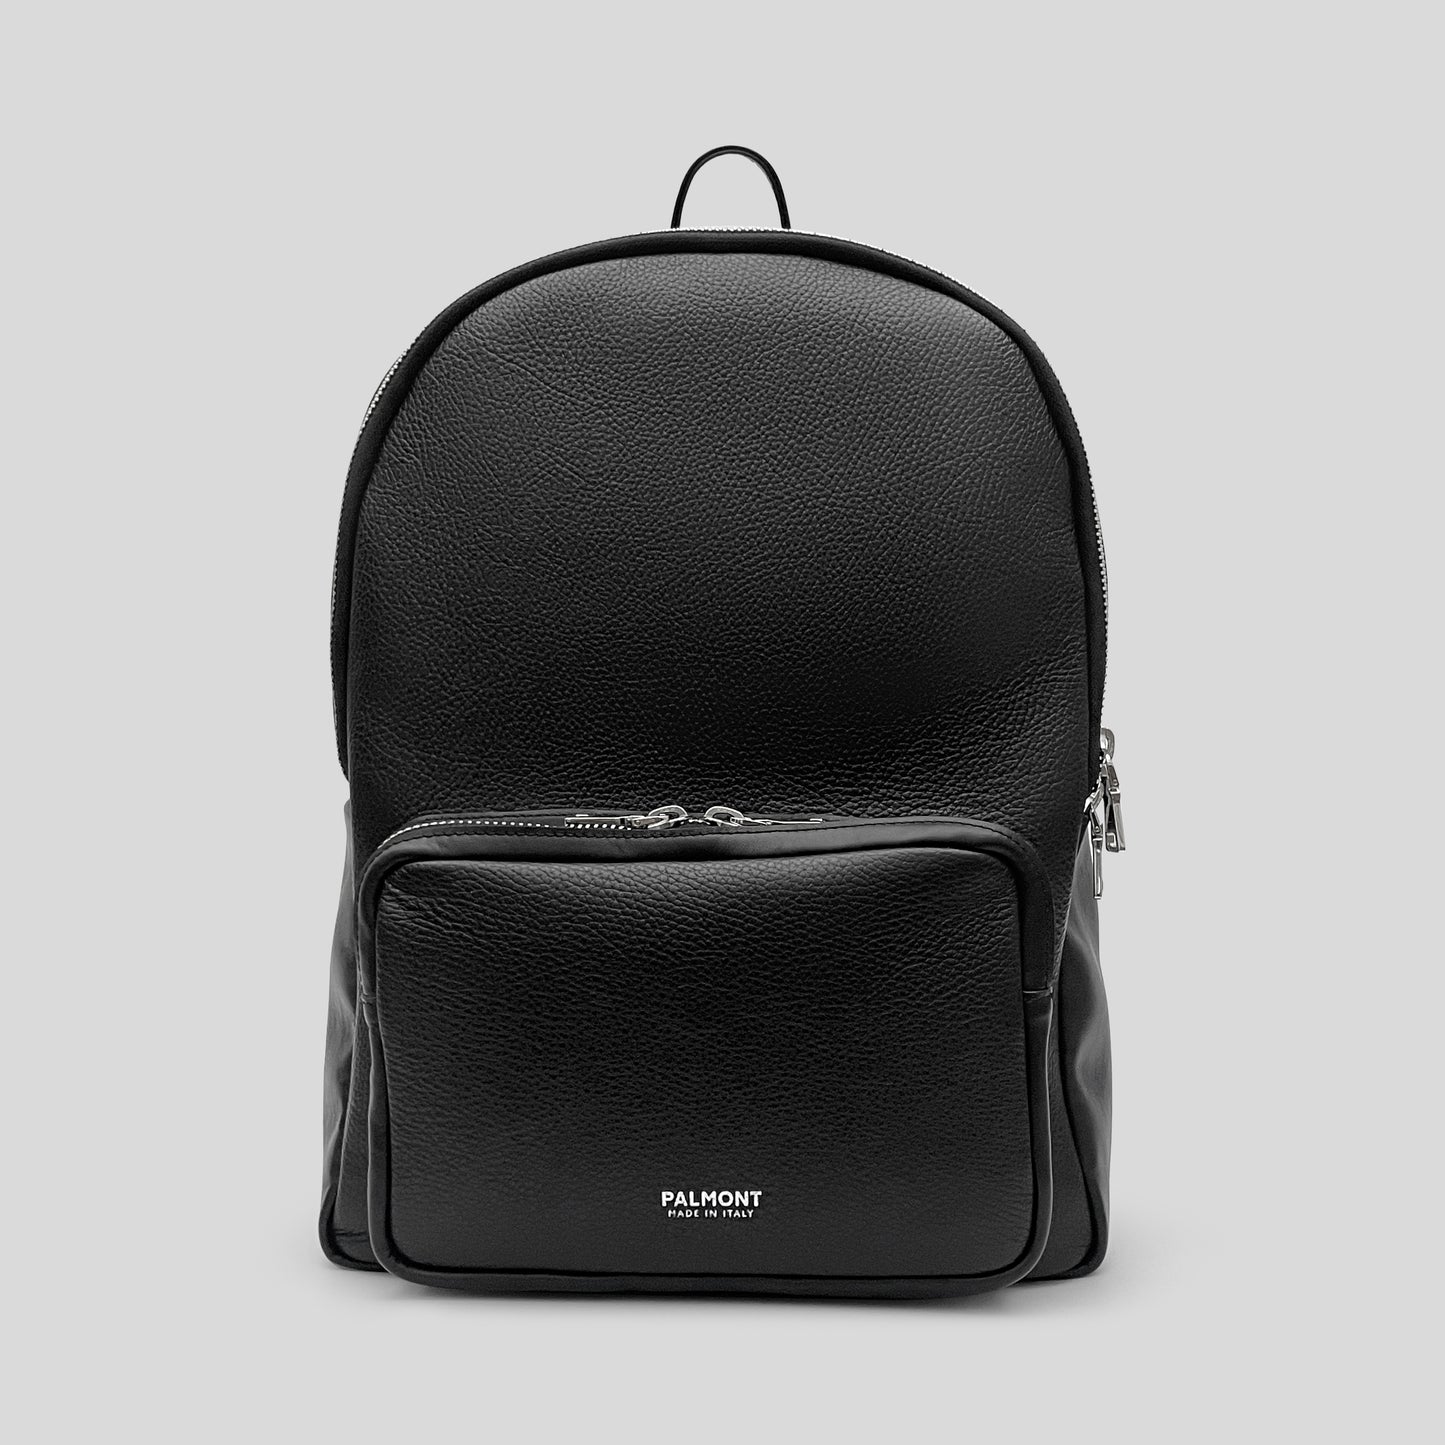 PM Backpack In Pebbled Black Leather